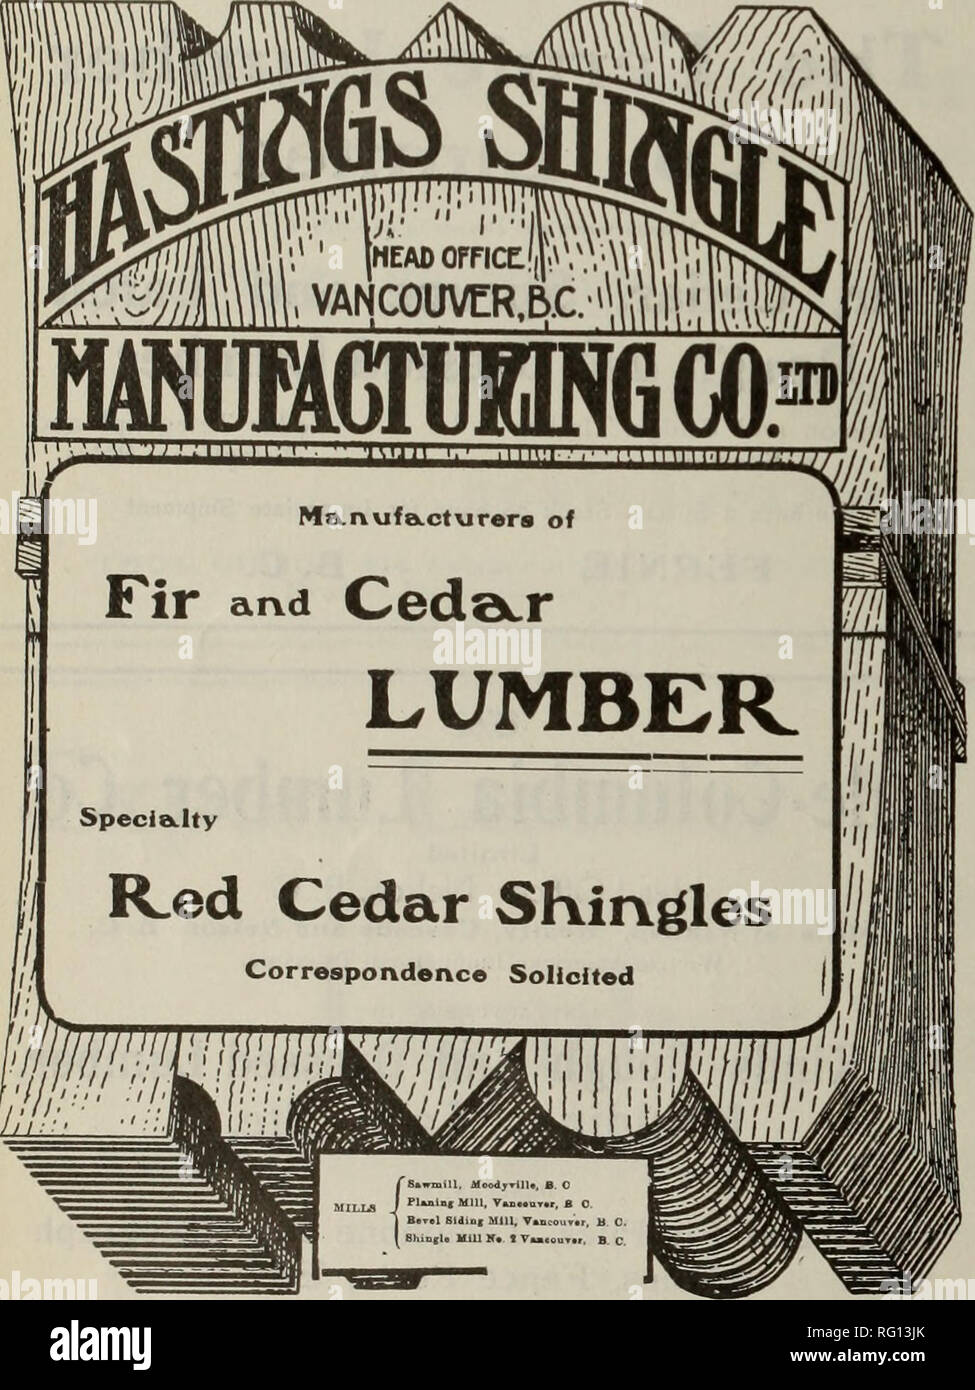 . Canadian forest industries 1909. Lumbering; Forests and forestry; Forest products; Wood-pulp industry; Wood-using industries. CANADA LUMBERMAN AND WOODWORKER Authorized Capital $250,000 (.£50,000) Imperial Timber and Trading Co., Ltd. P.O. Box 930, Vancouver, B. C. Export Lumber Standing Timber BRITISH COLUMBIA DOUGLAS FIR (Columbian Pine), RED CEDAR and SPRUCE, ALASKA PINE, CYPRESS and CALIFORNIA REDWOOD (Sequoia). Can be shipped in Small Parcels. Straight or Mixed Cargoes. Gait Machine Knife Works. Please note that these images are extracted from scanned page images that may have been digi Stock Photo